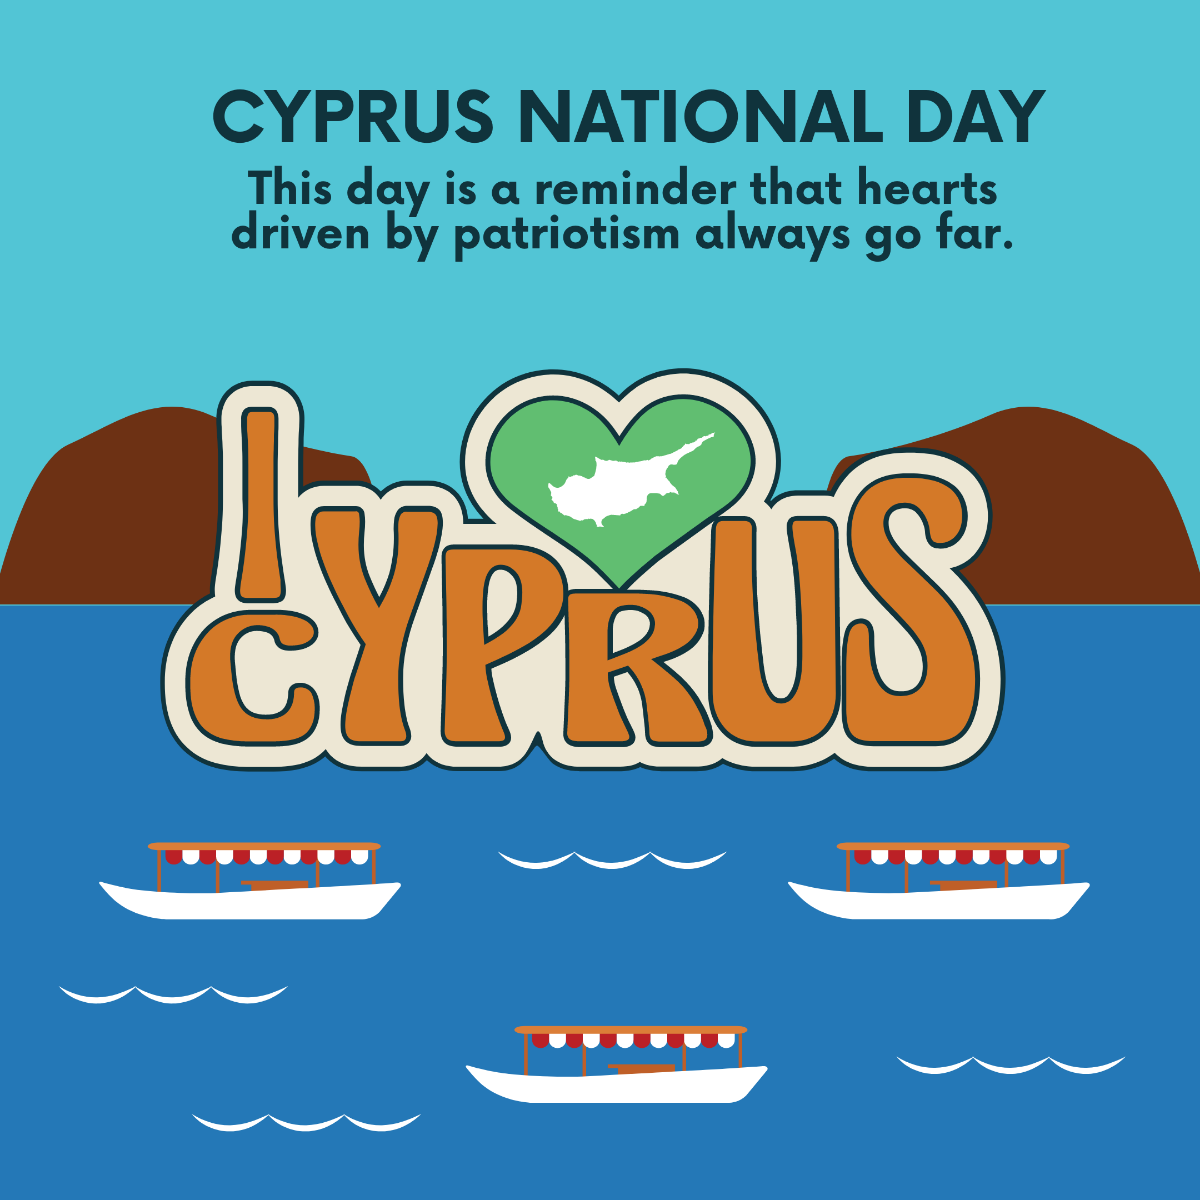 Cyprus National Day Instagram Post